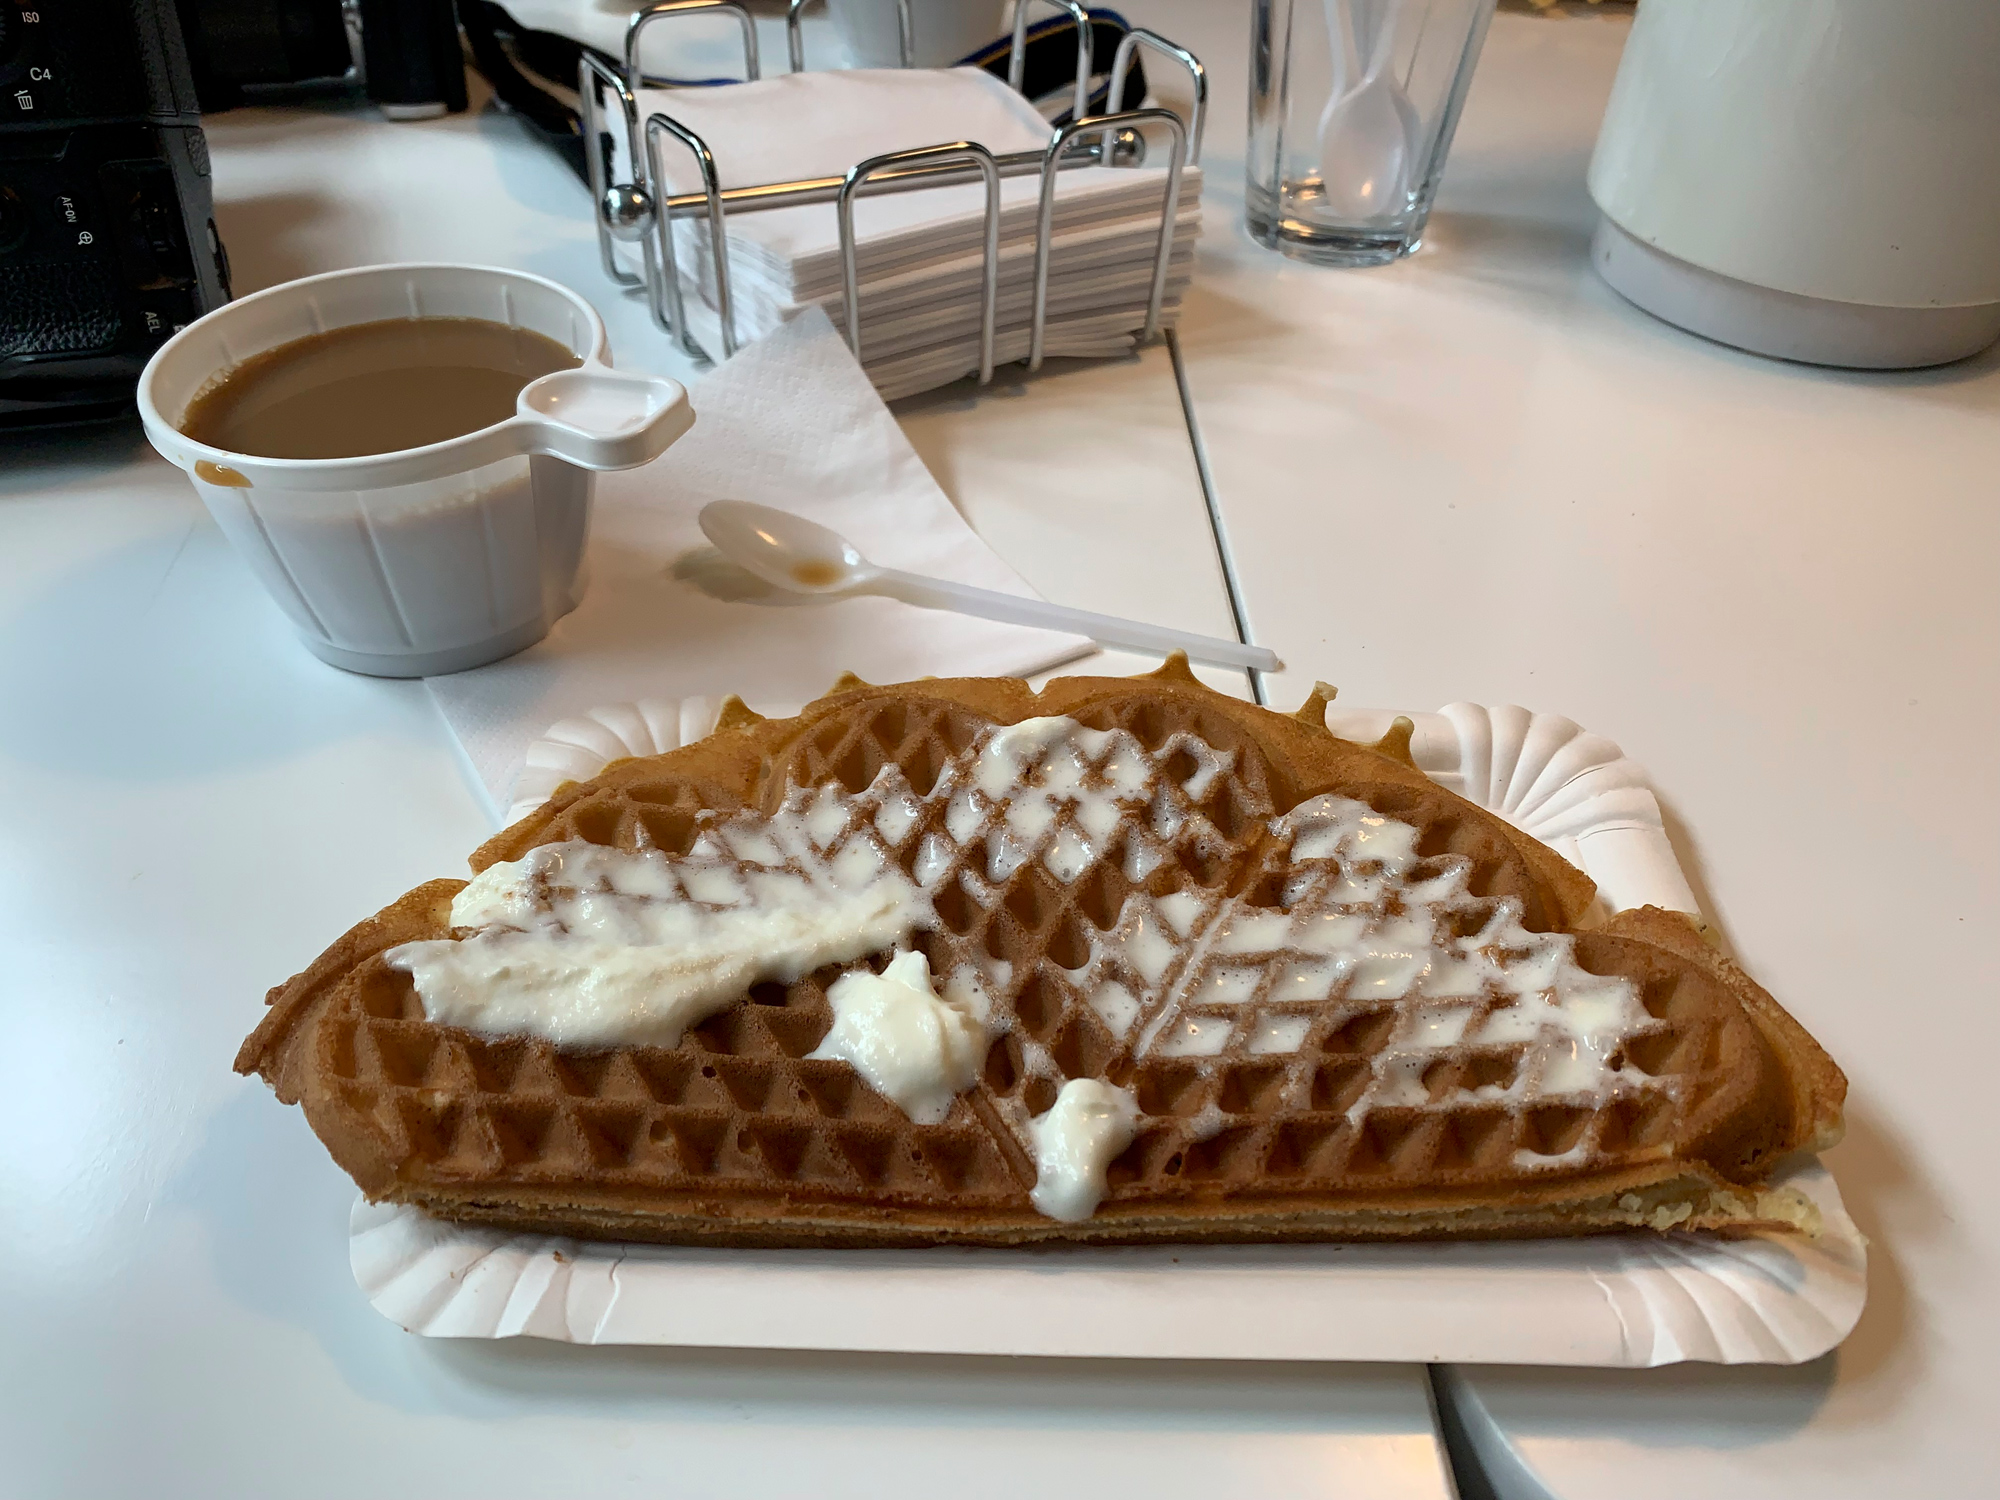 When we need some warmth and a snack there is nothing like a Faroe Island waffle and coffee